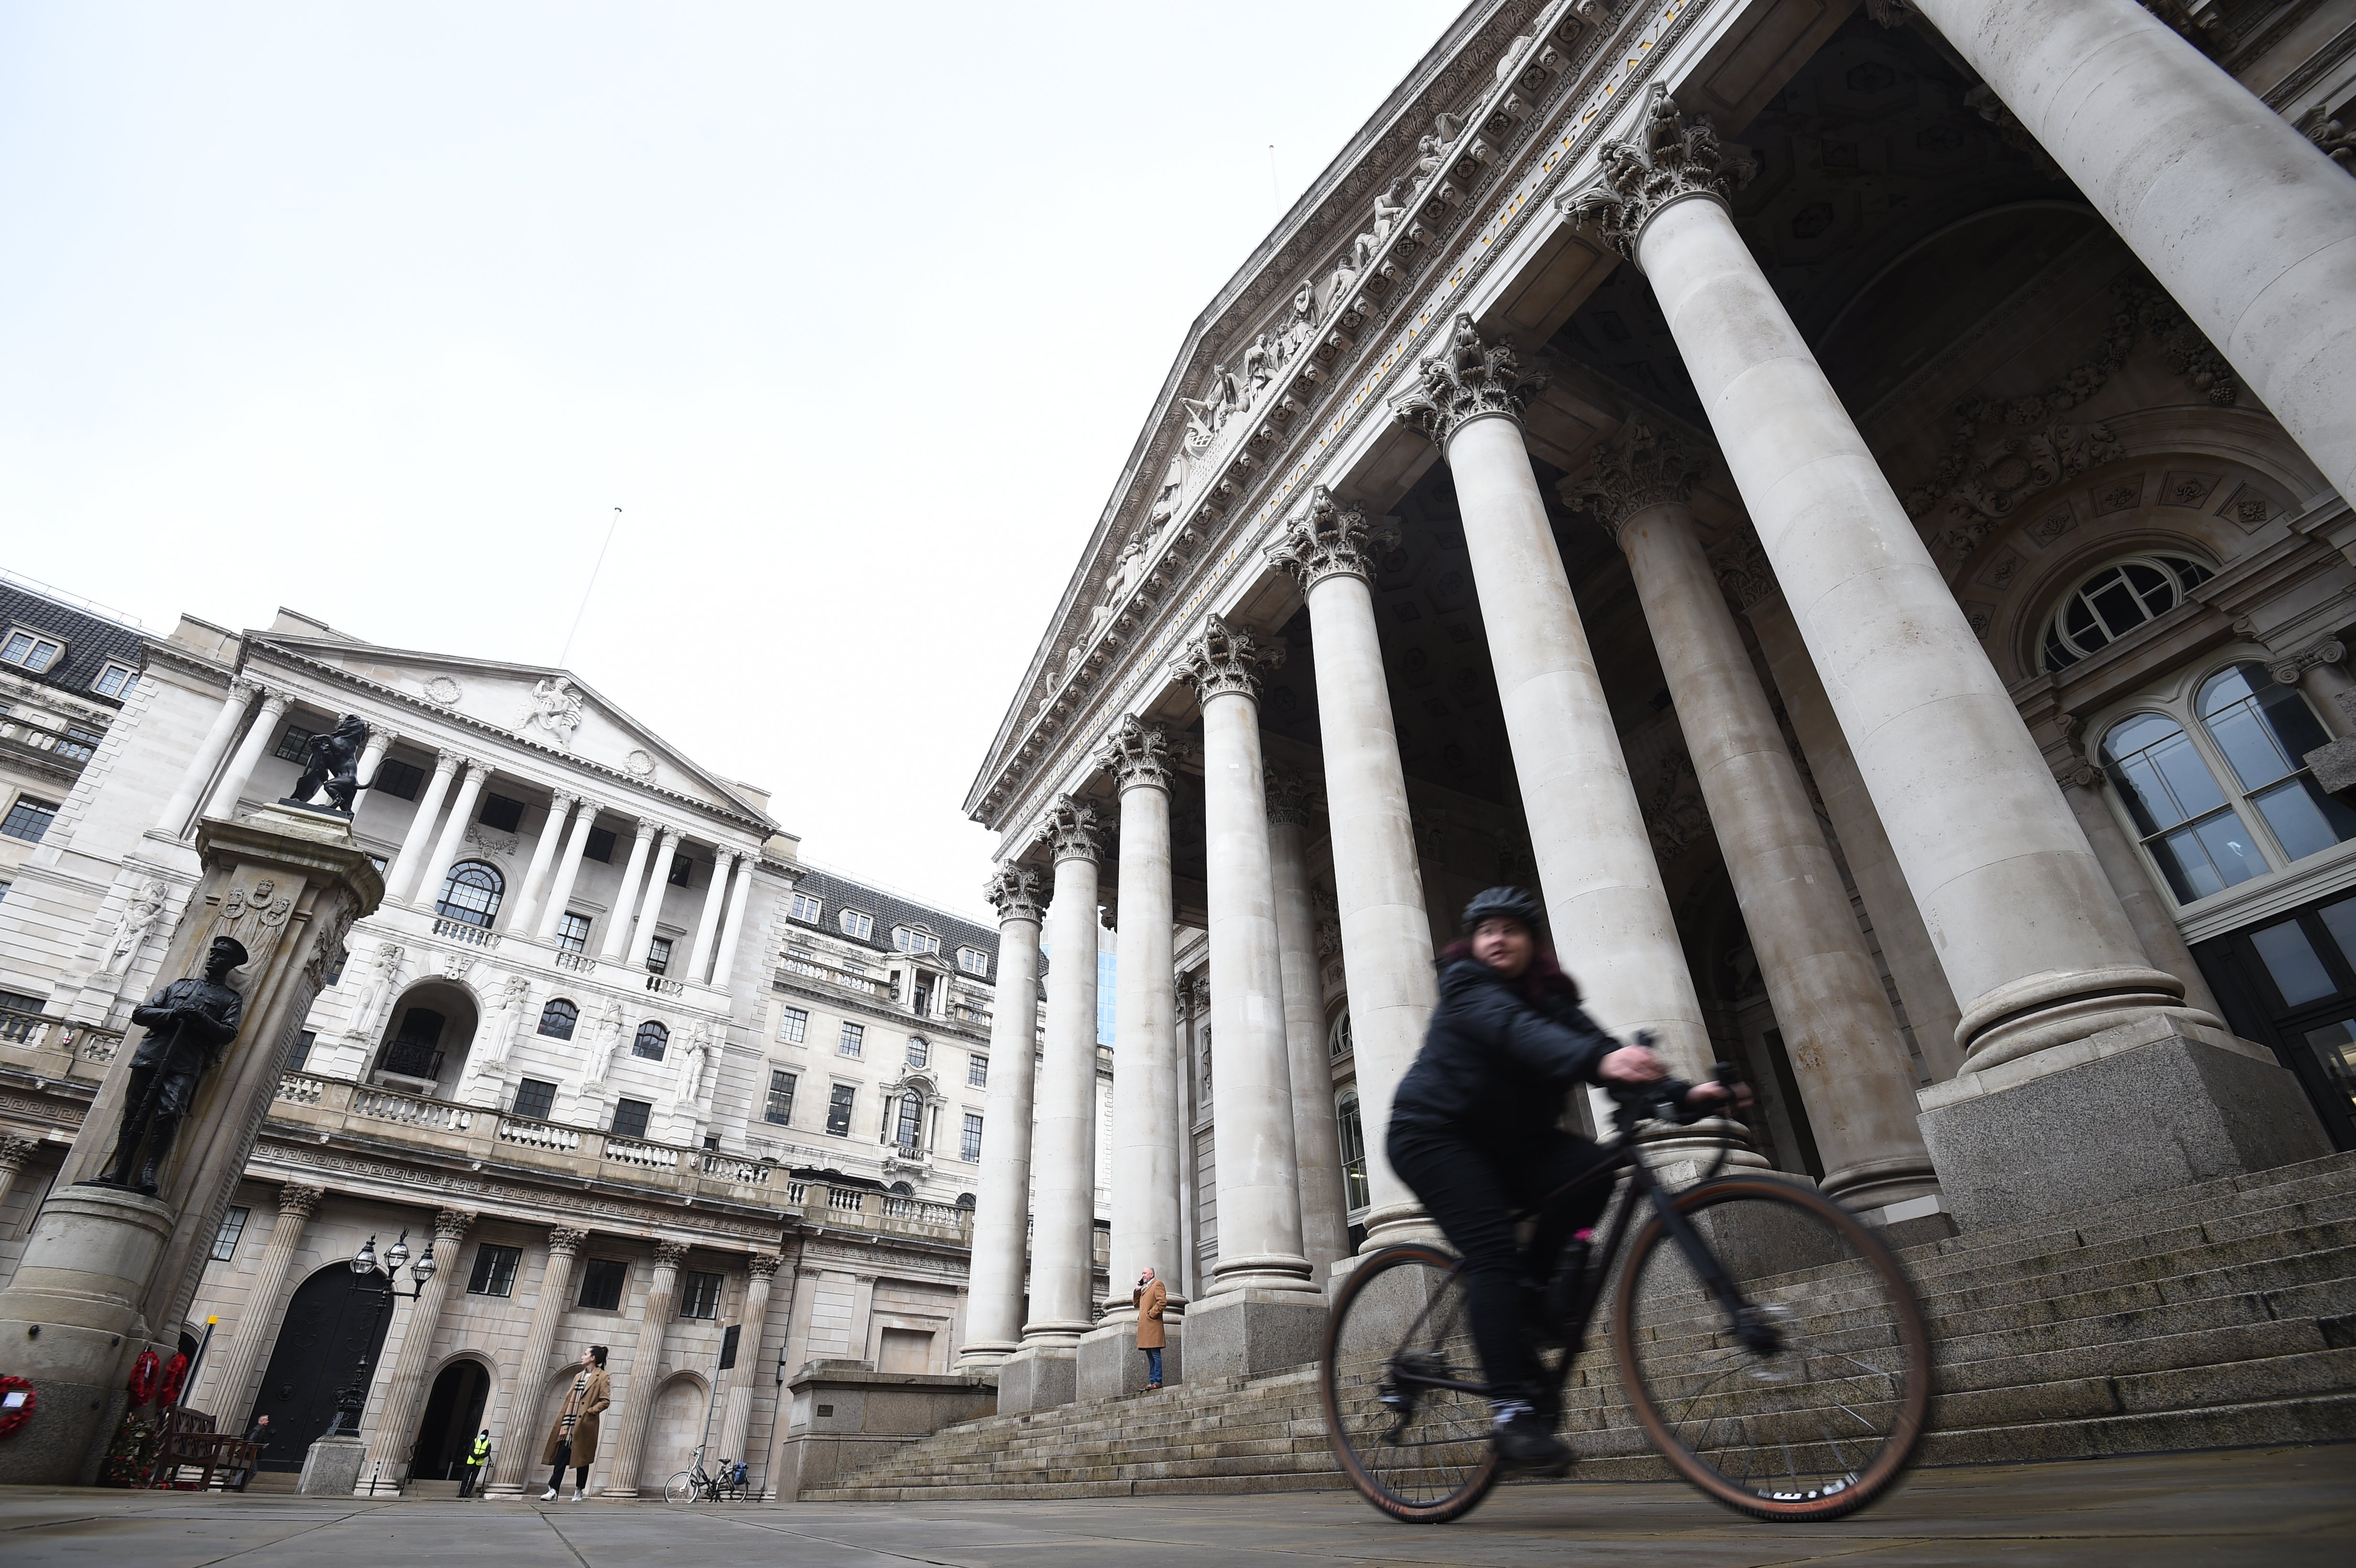 Perhaps the Bank of England has being paying attention to Angela Merkel